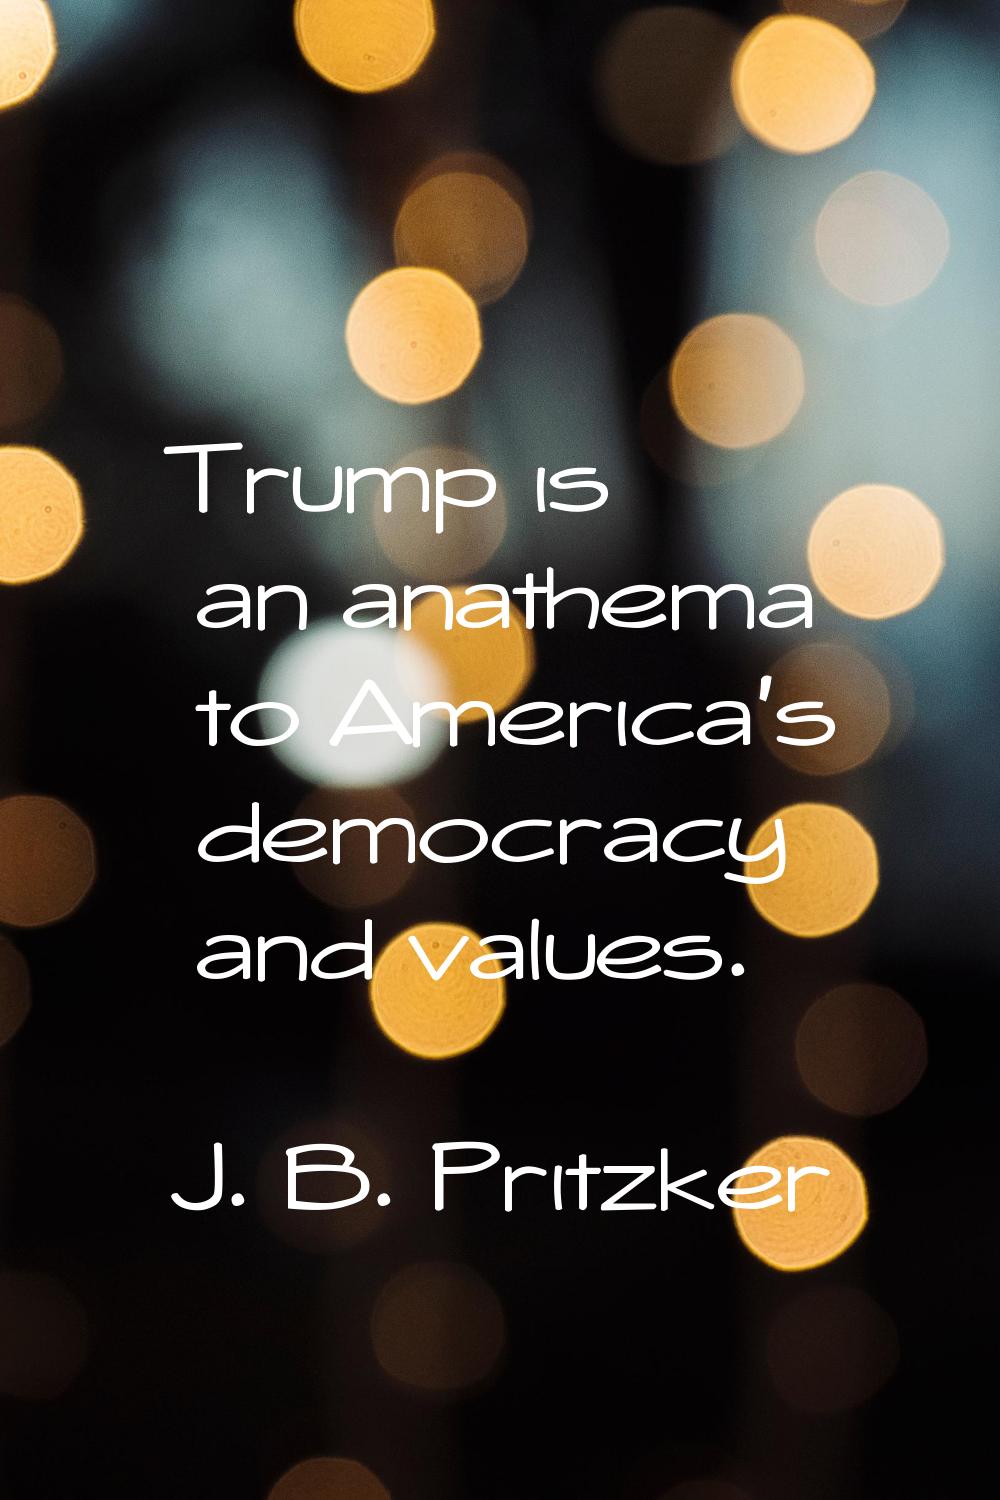 Trump is an anathema to America's democracy and values.